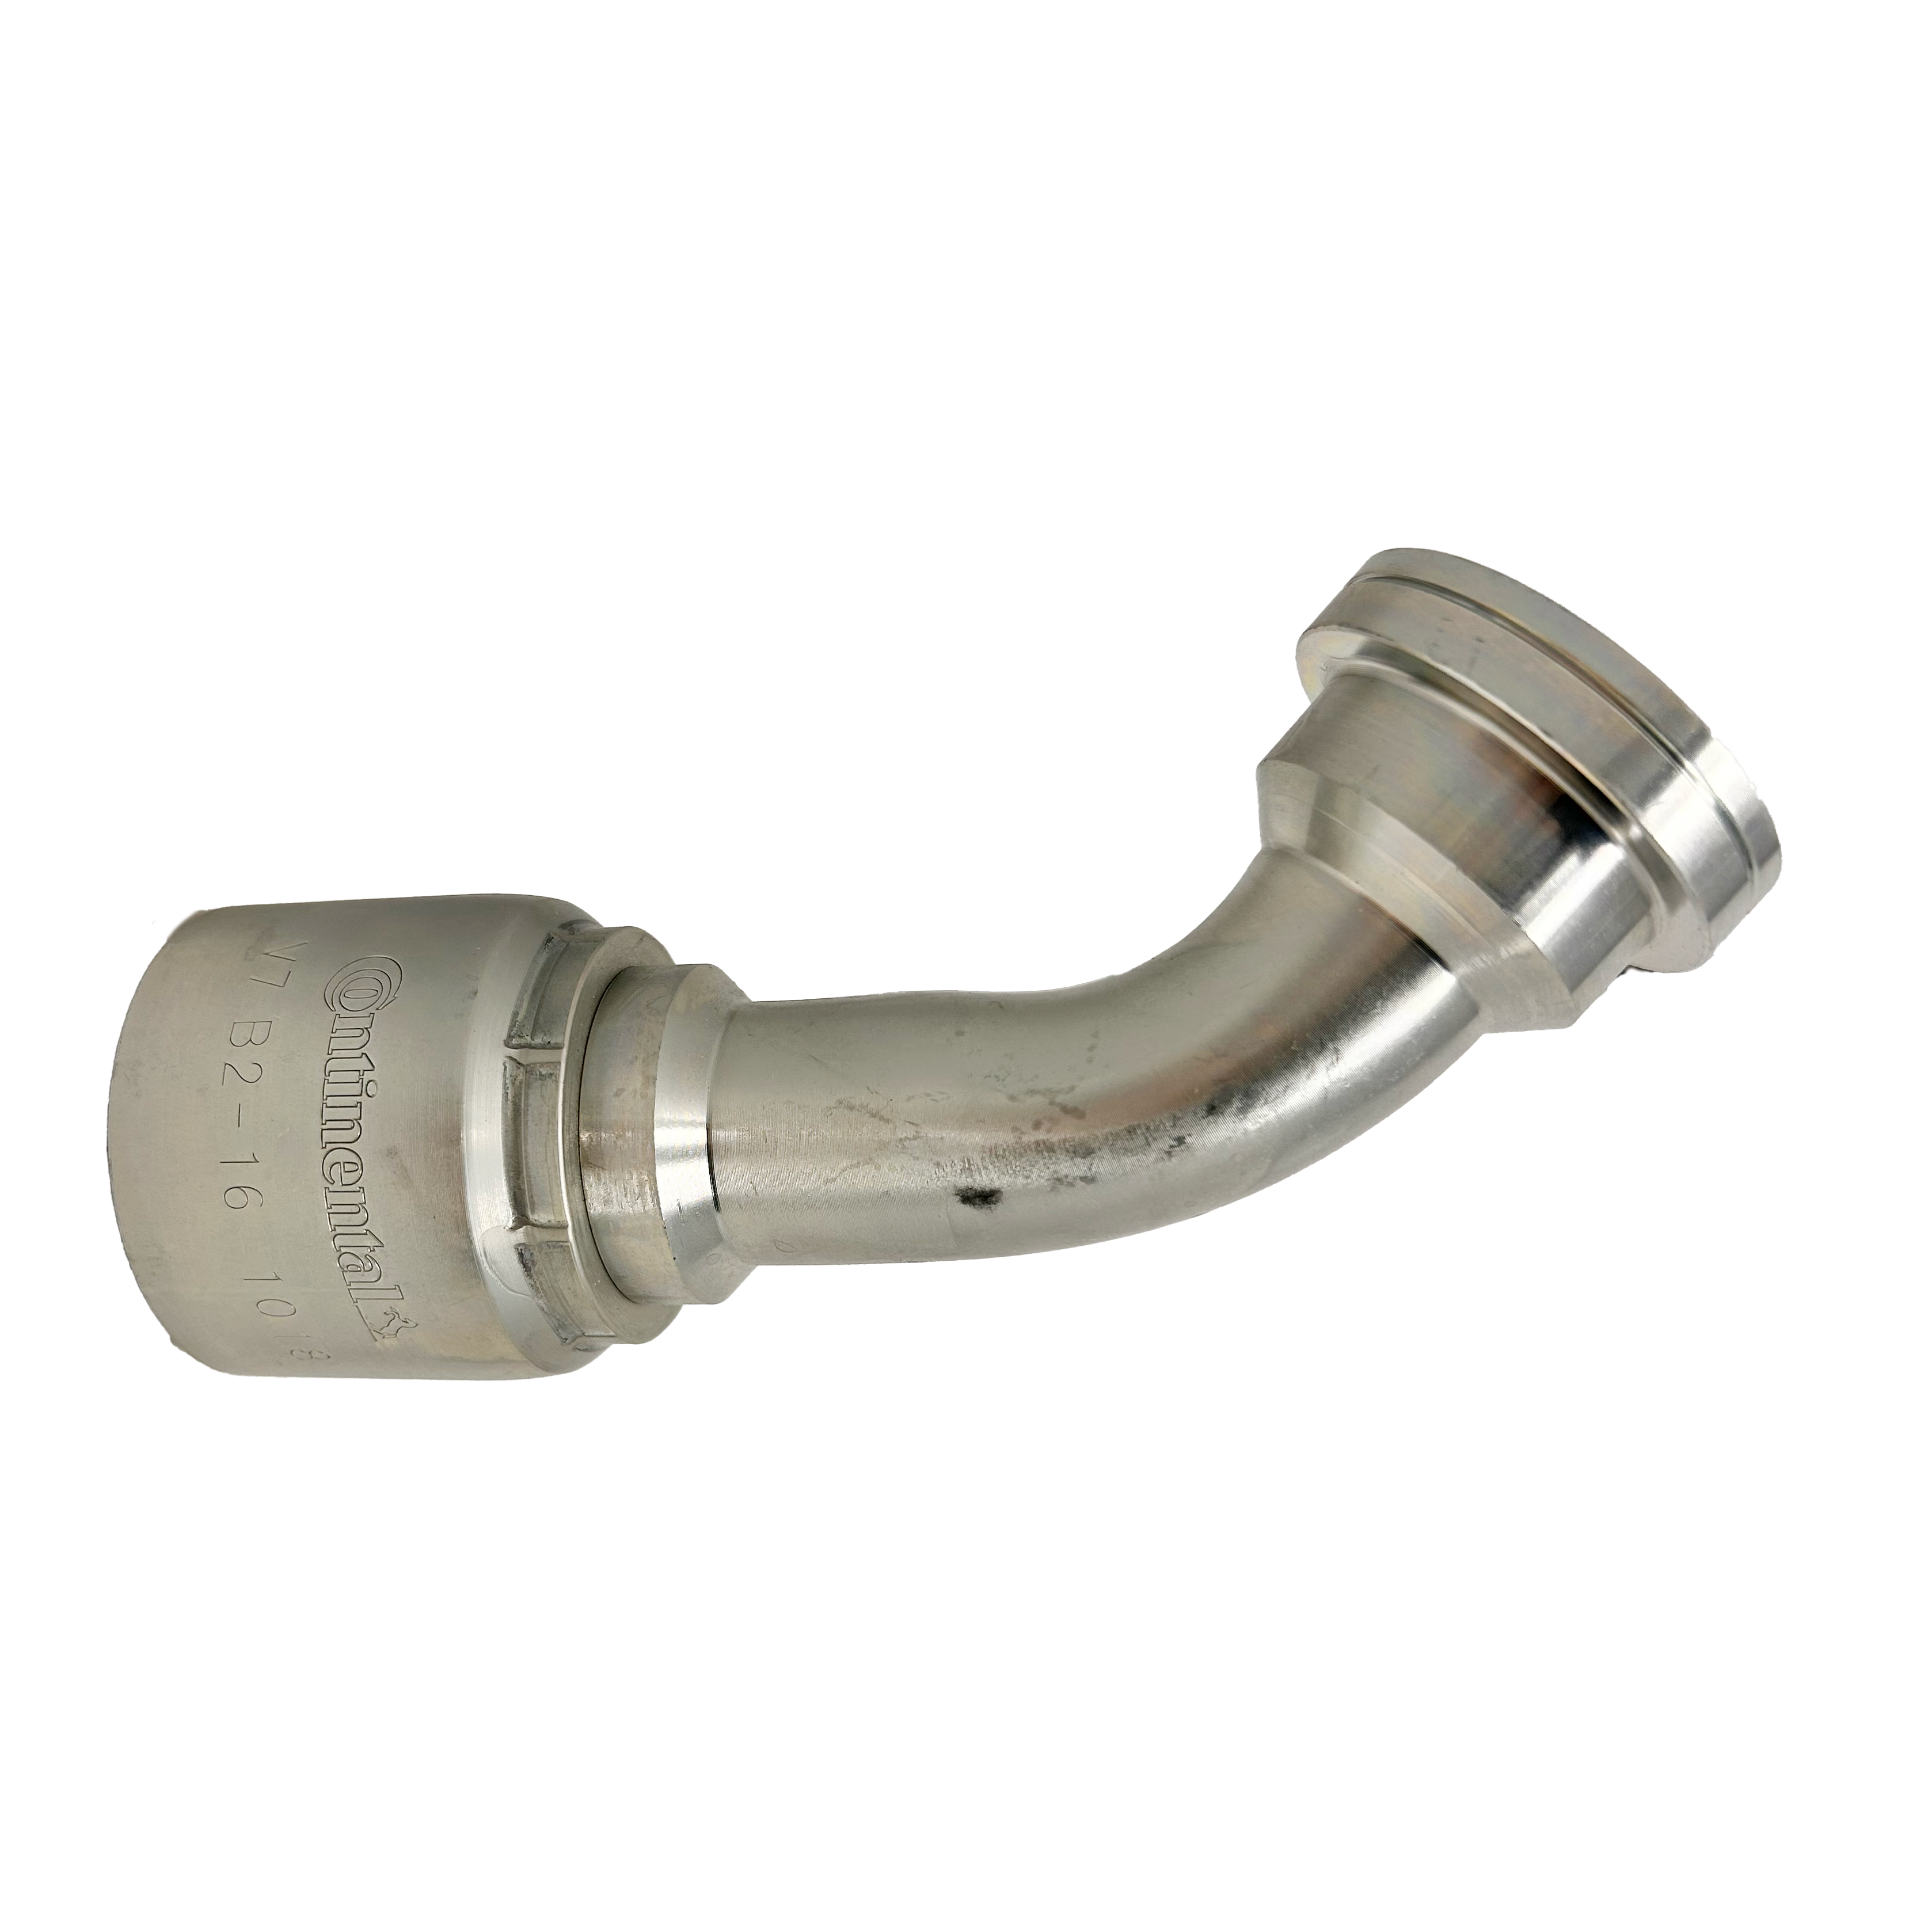 B2-FH45-1616: Continental Hose Fitting, 1" Hose ID x 1" Code 62, 45-Degree Connection